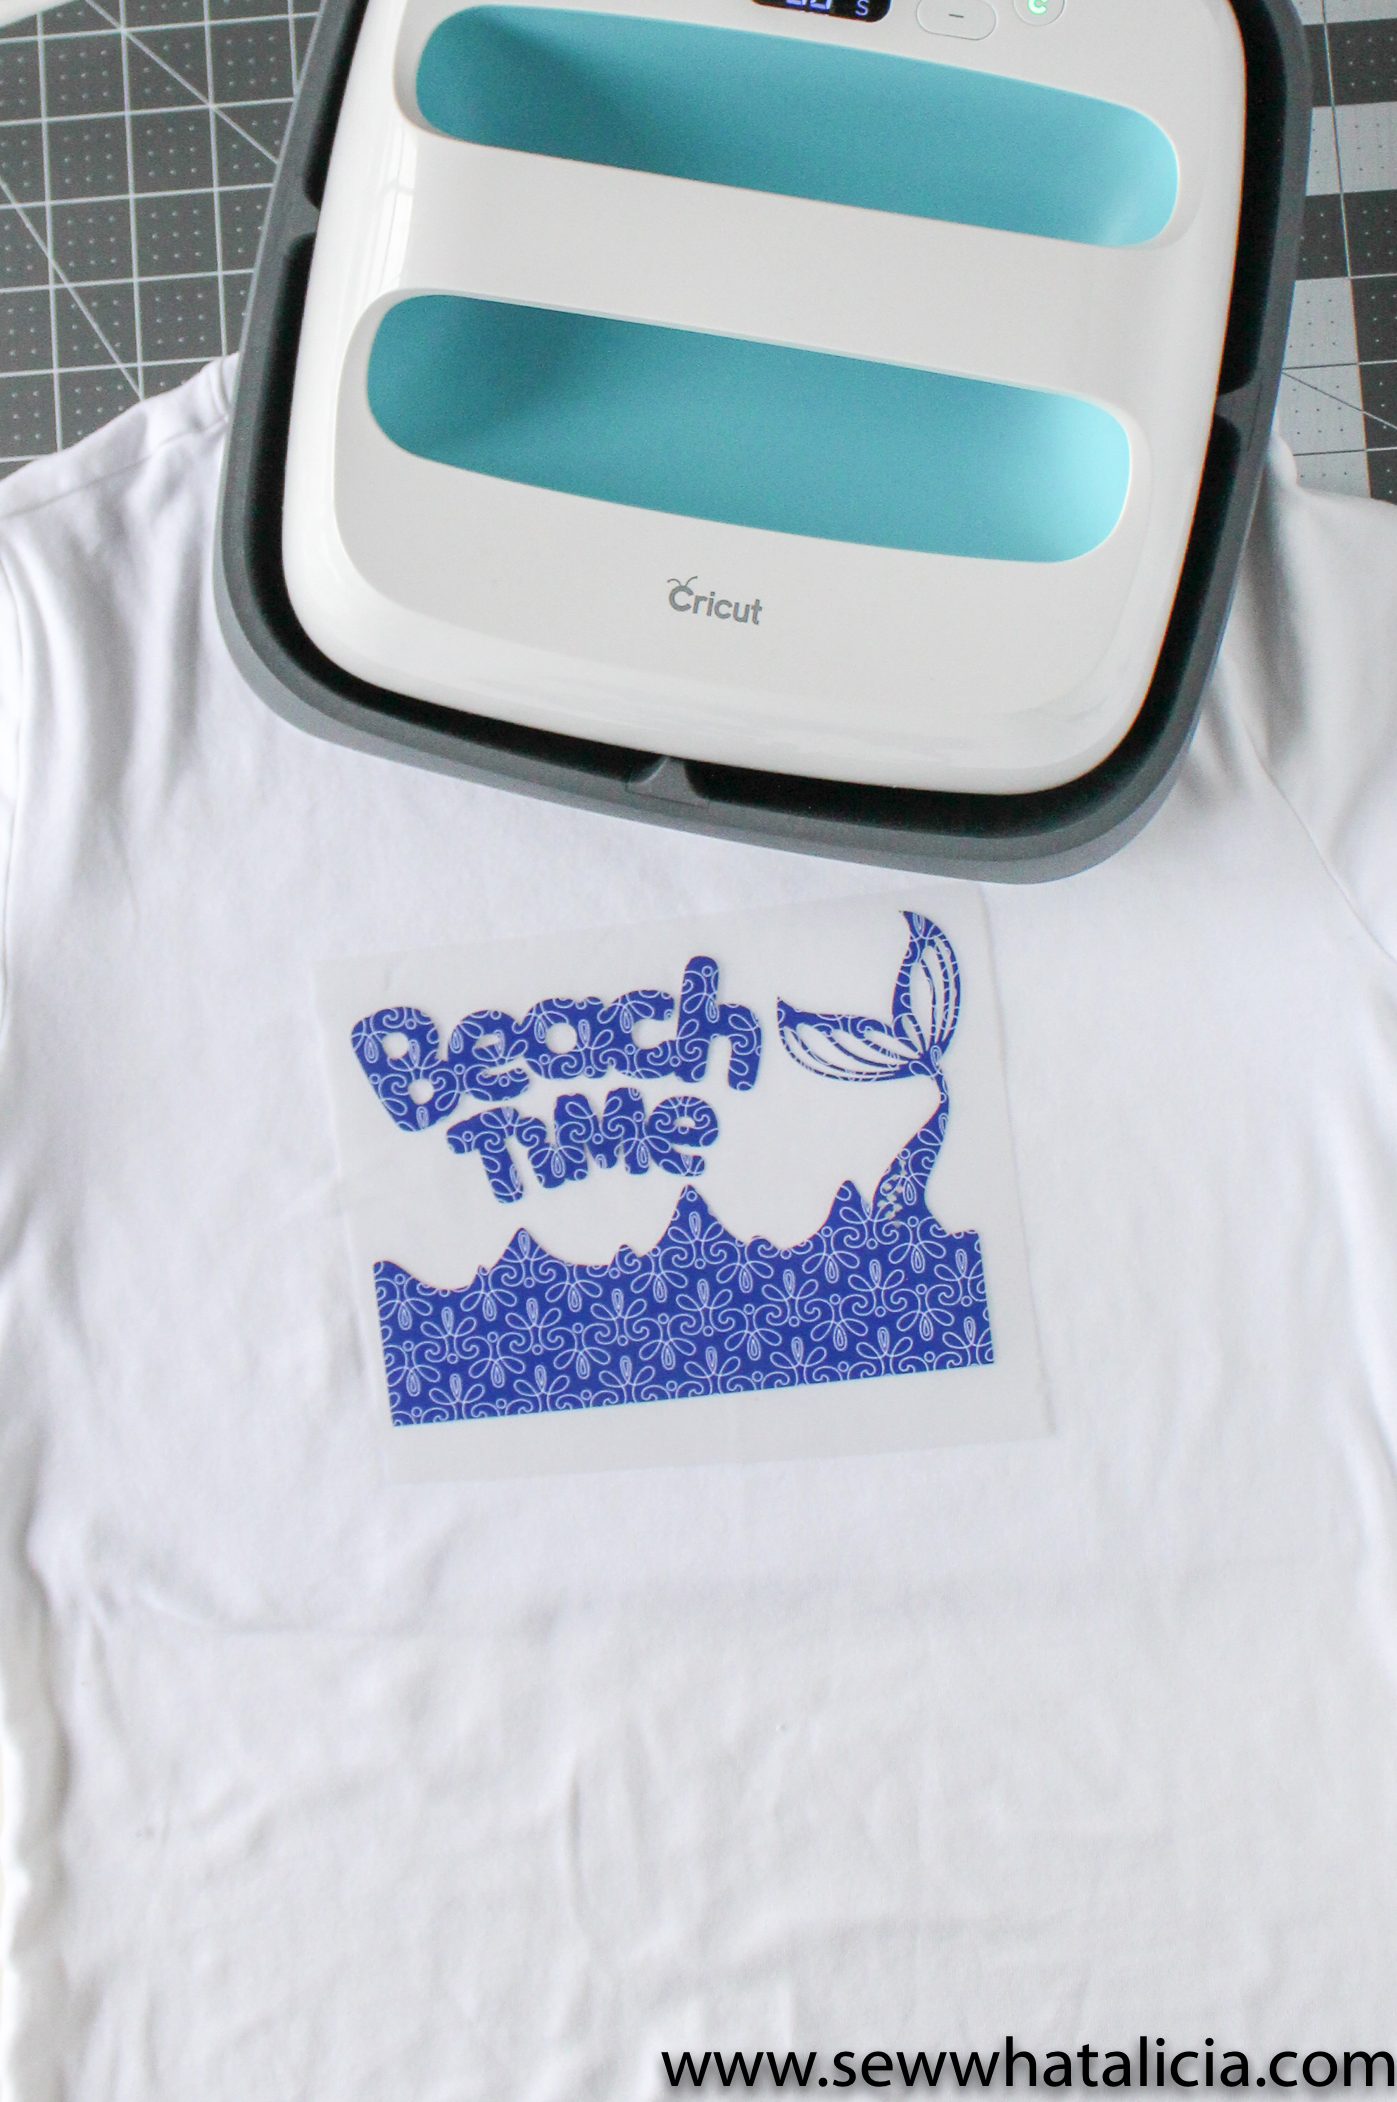 Cricut Patterned Iron On Tips and Tricks: Pictured beach design placed on shirt with Cricut EasyPress above. | www.sewwhatalicia.com